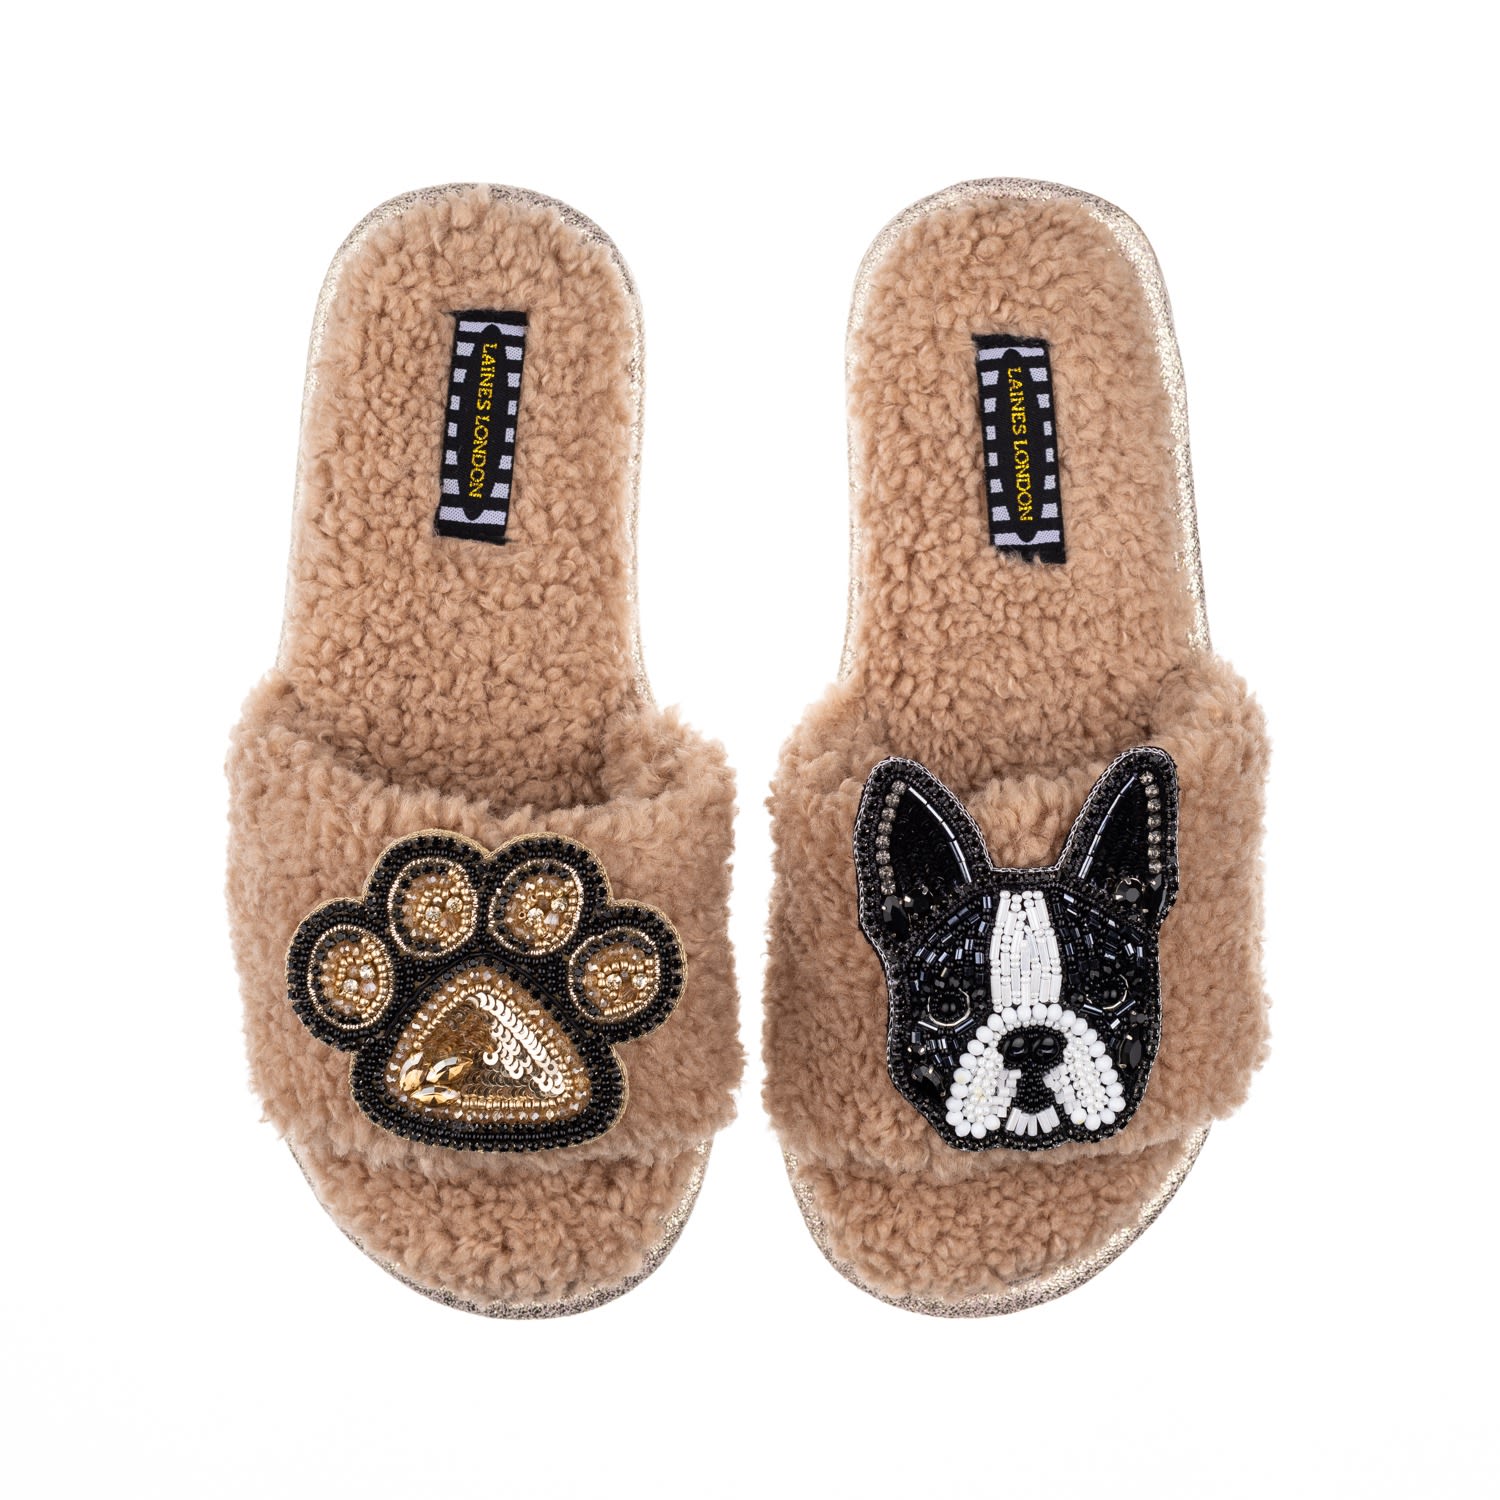 Laines London Women's Brown Teddy Towelling Slipper Sliders With Buddy Boston Terrier & Paw Brooches - Toffee